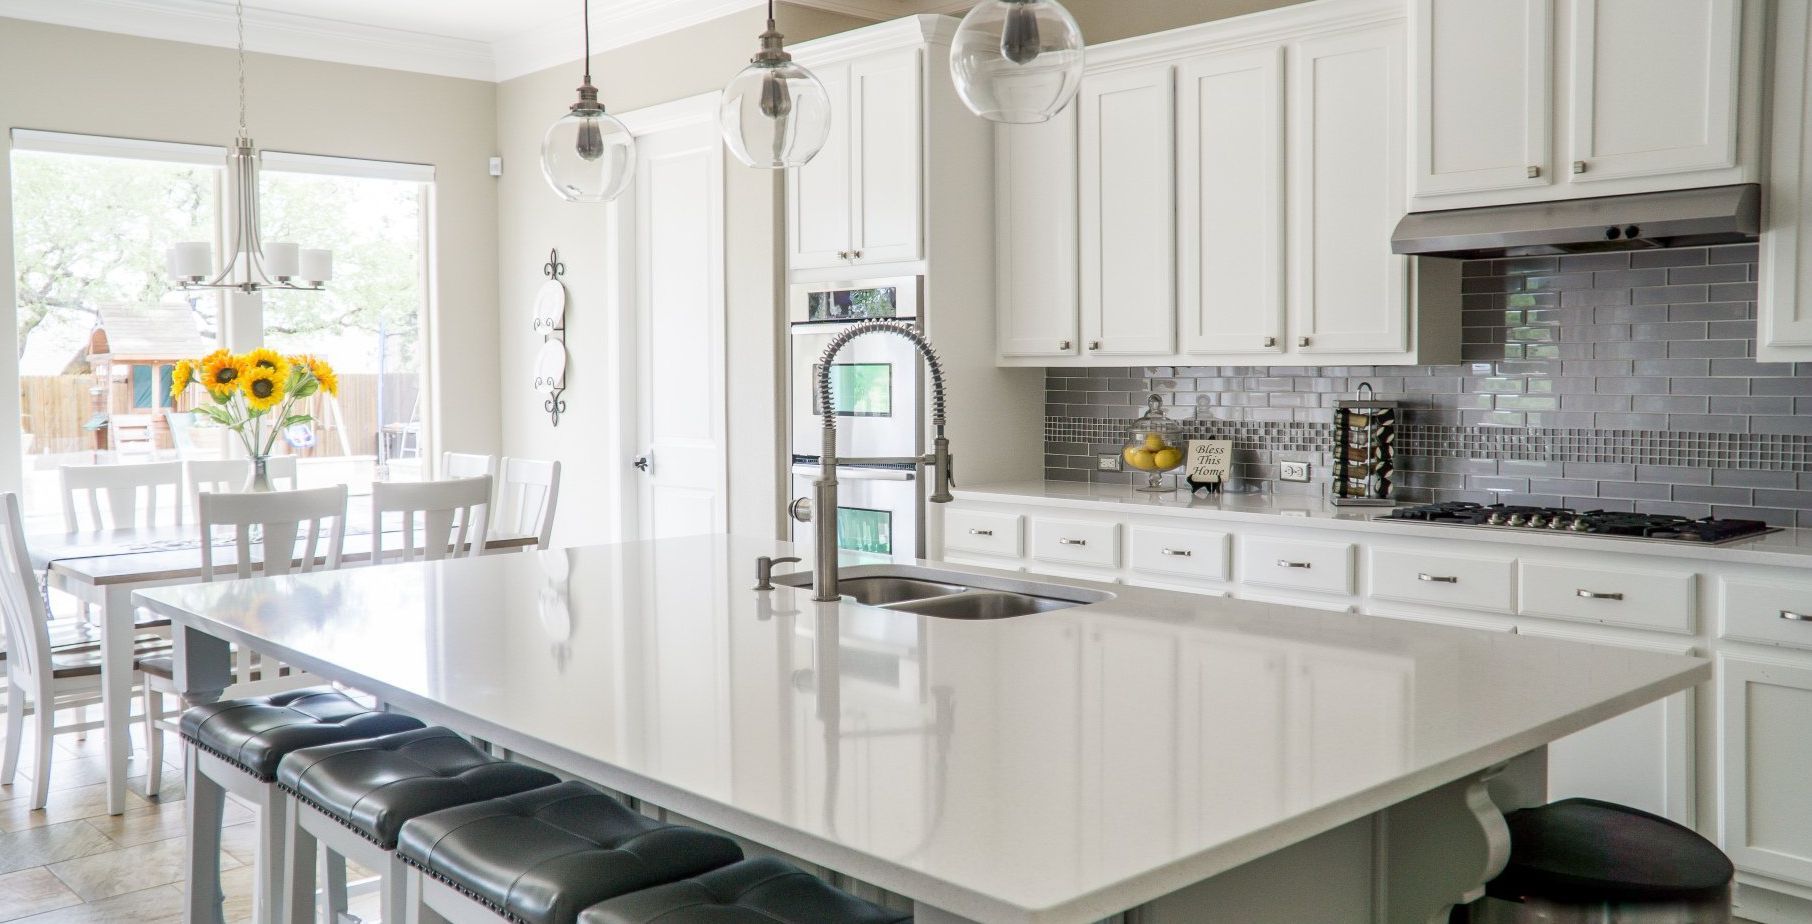 5 Budget-Friendly Kitchen Remodeling Ideas Transform Your Space